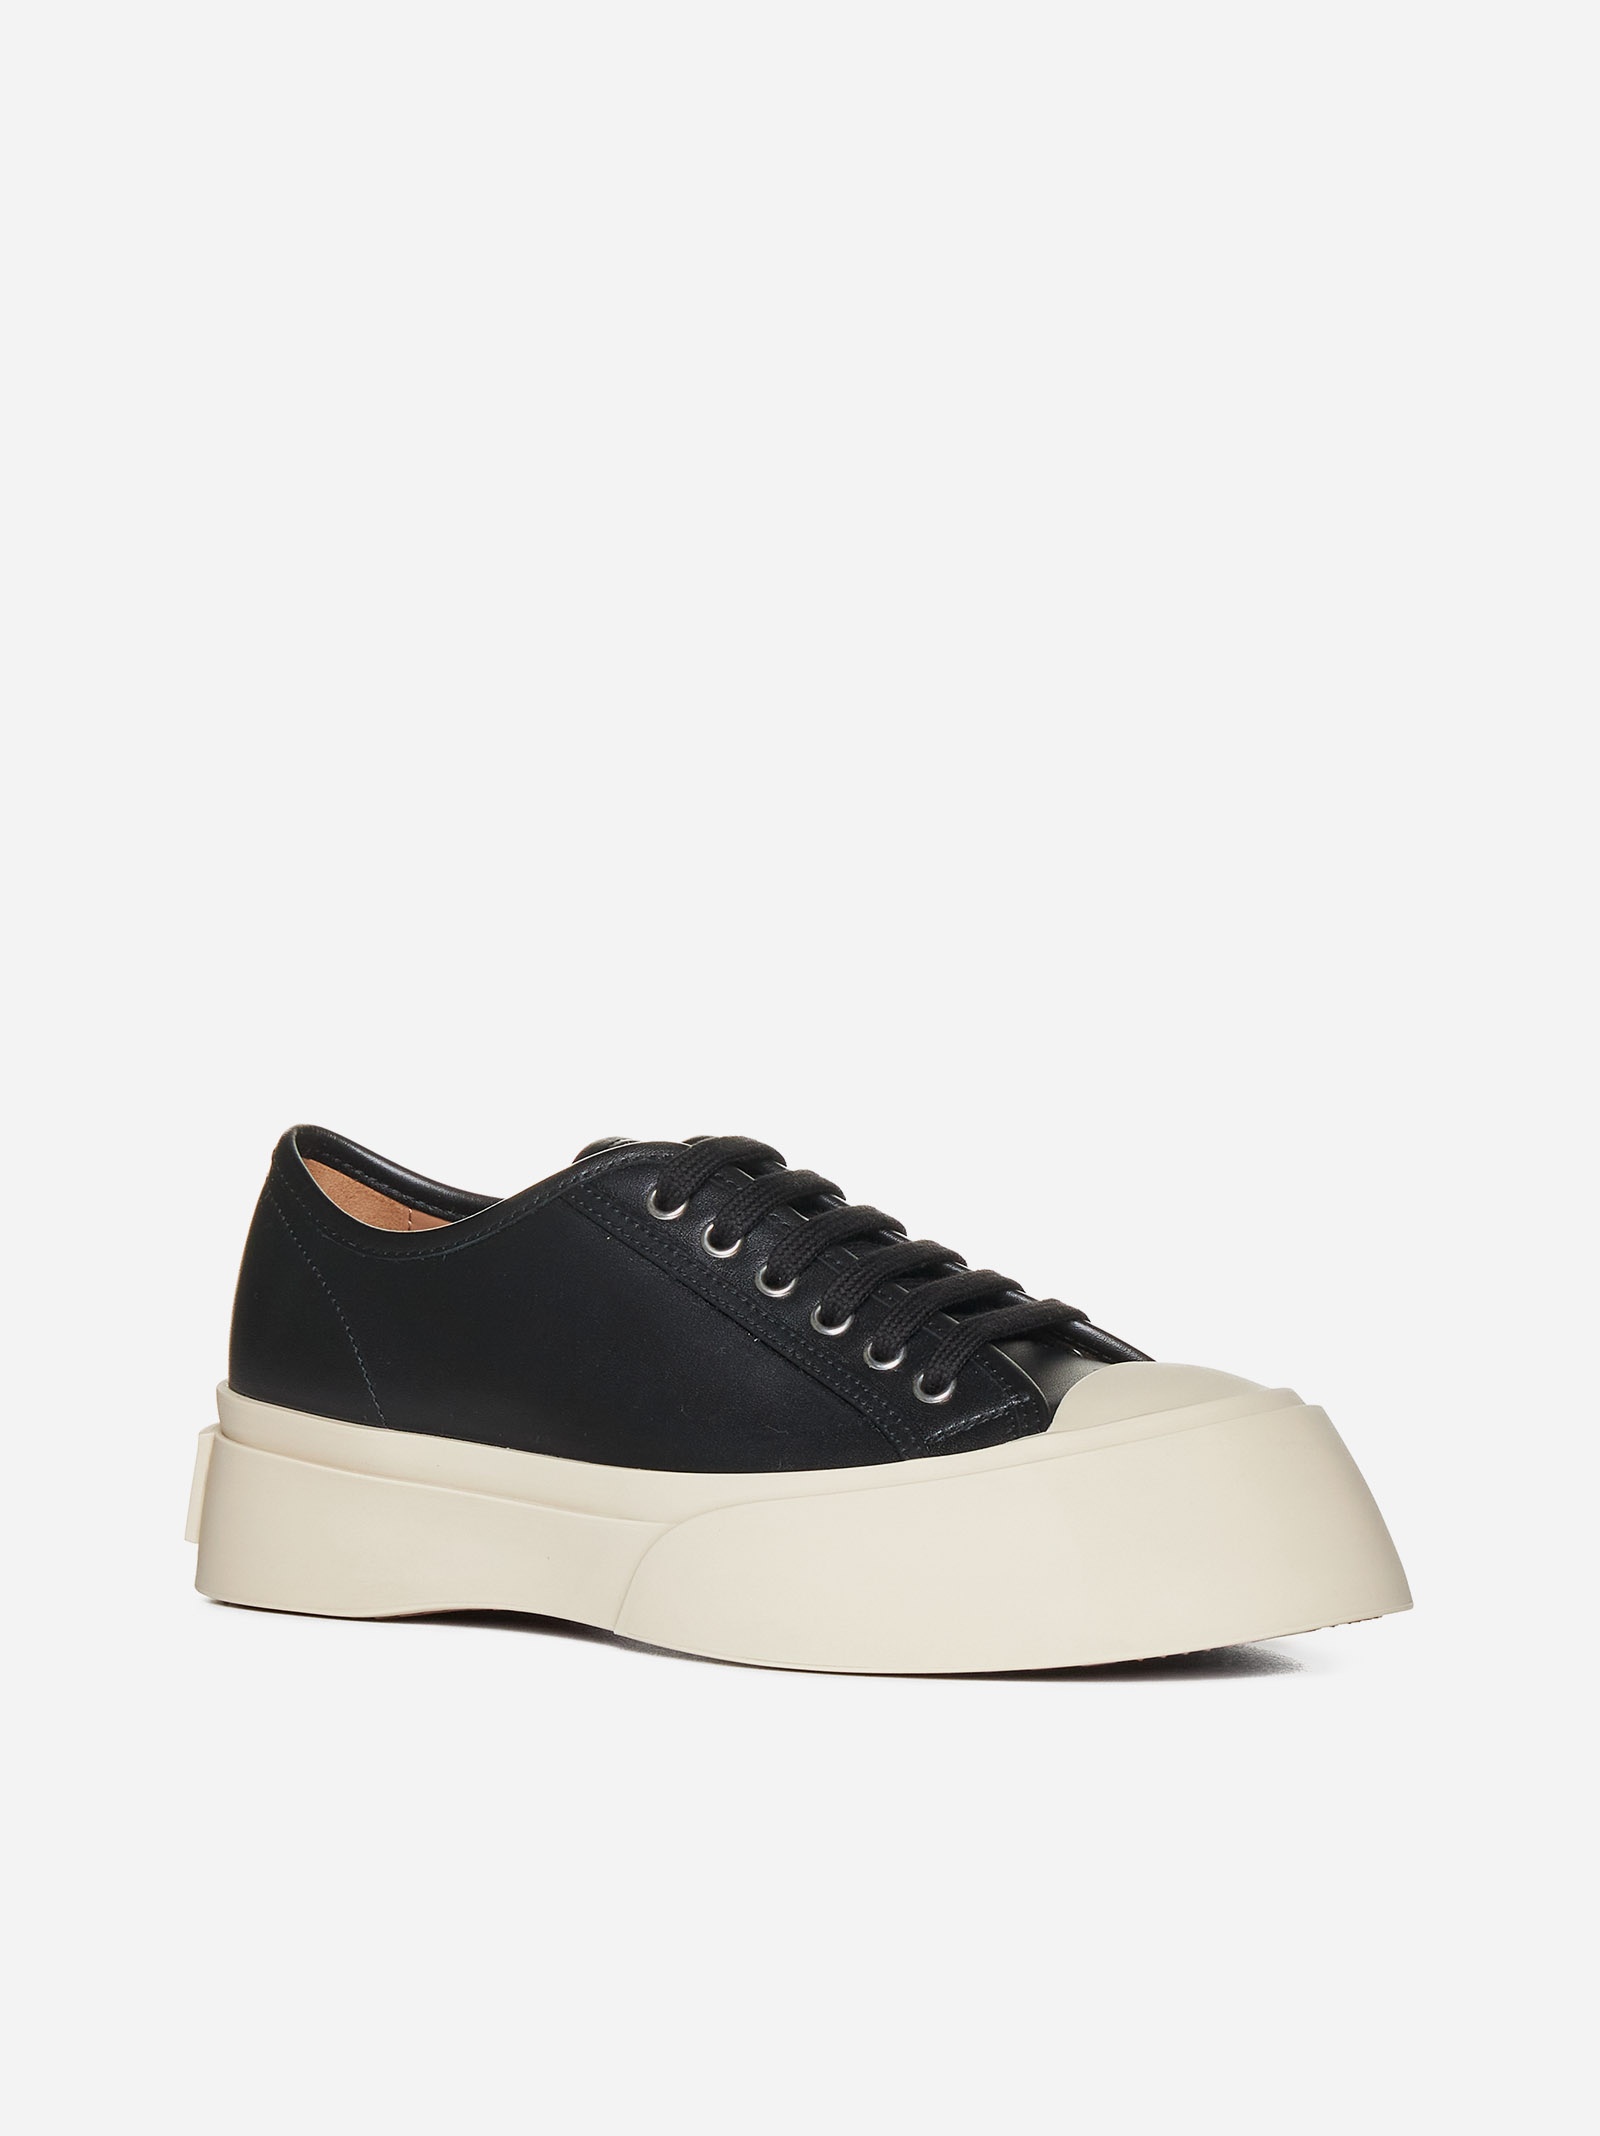 Pablo leather sneakers - 2